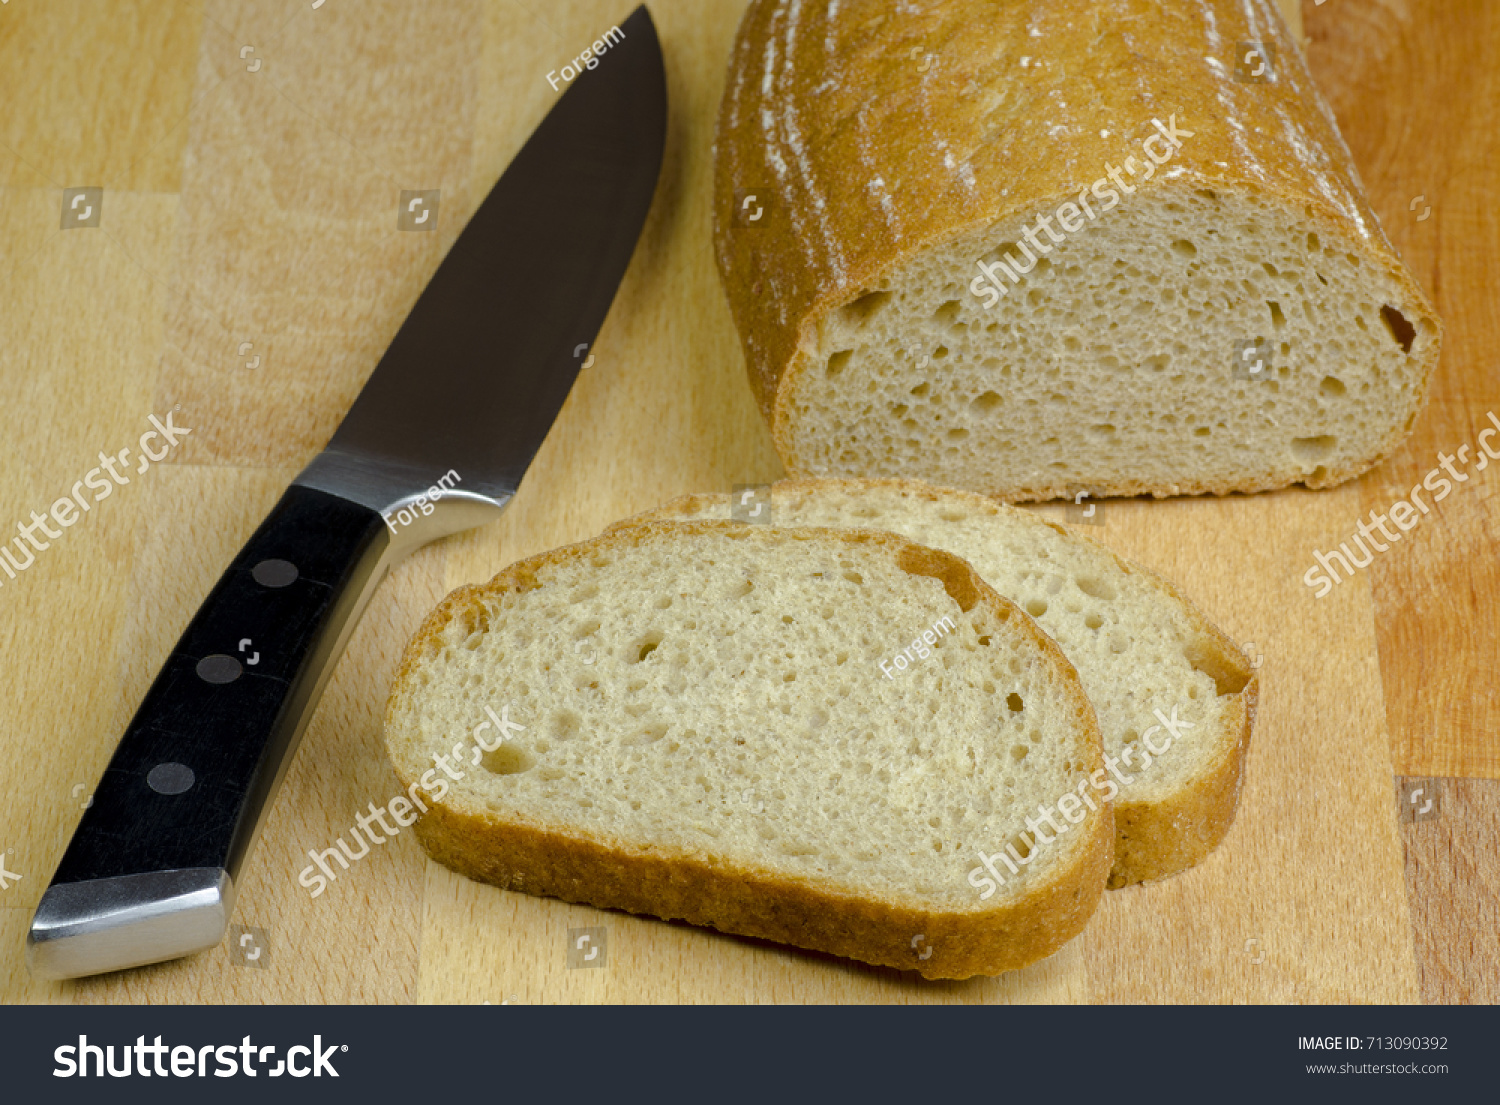 Close-up photo of two slices of bread cut by knife with black handle on a wooden board table with blurred background #713090392